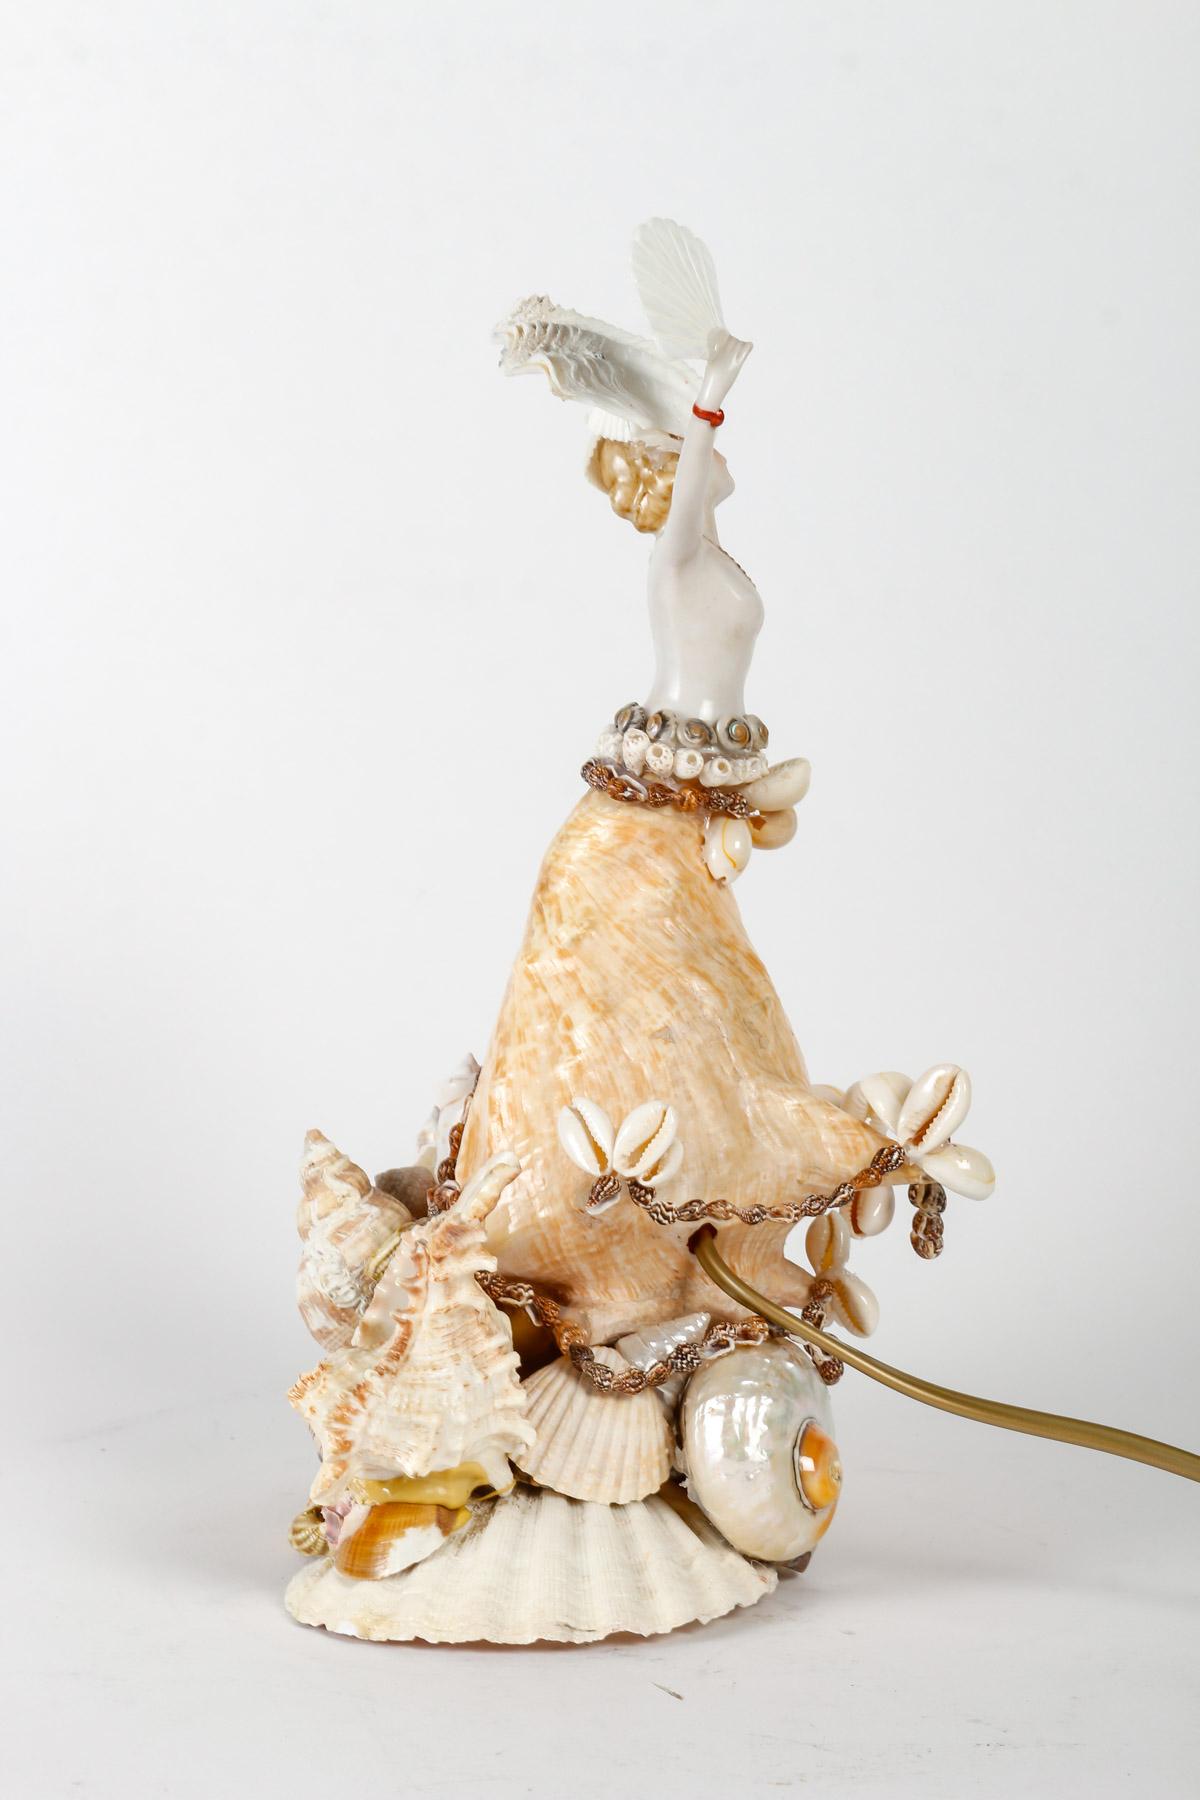 Table lamp, shell sculpture, porcelain figure forming a night-light in the central shell, 20th century.
h: 30cm, w: 21cm, d: 17cm